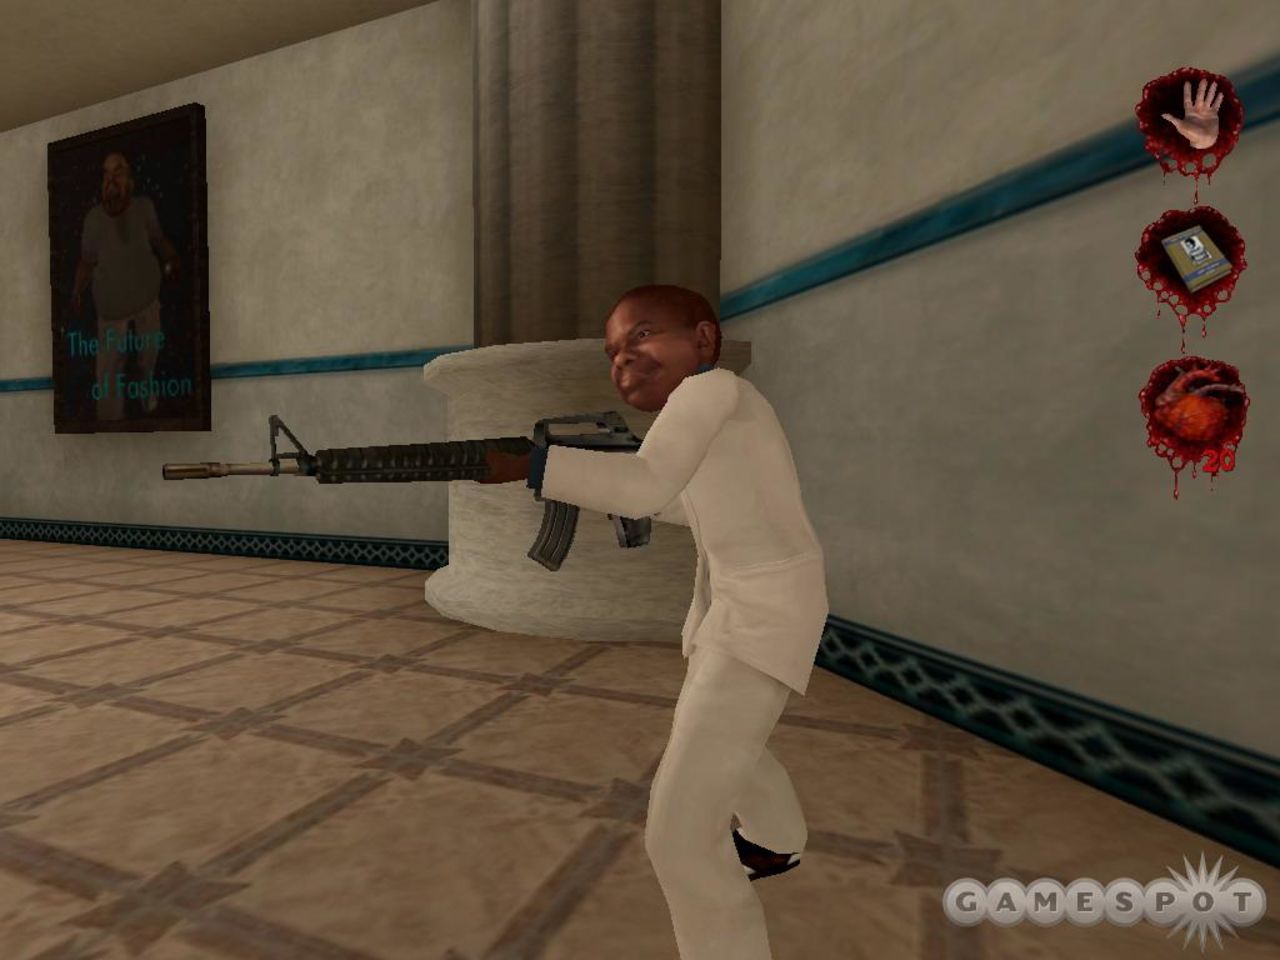 Perhaps the least objectionable aspect of "Postal 2 was a cameo appearance by actor Gary Coleman, who died in 2010.